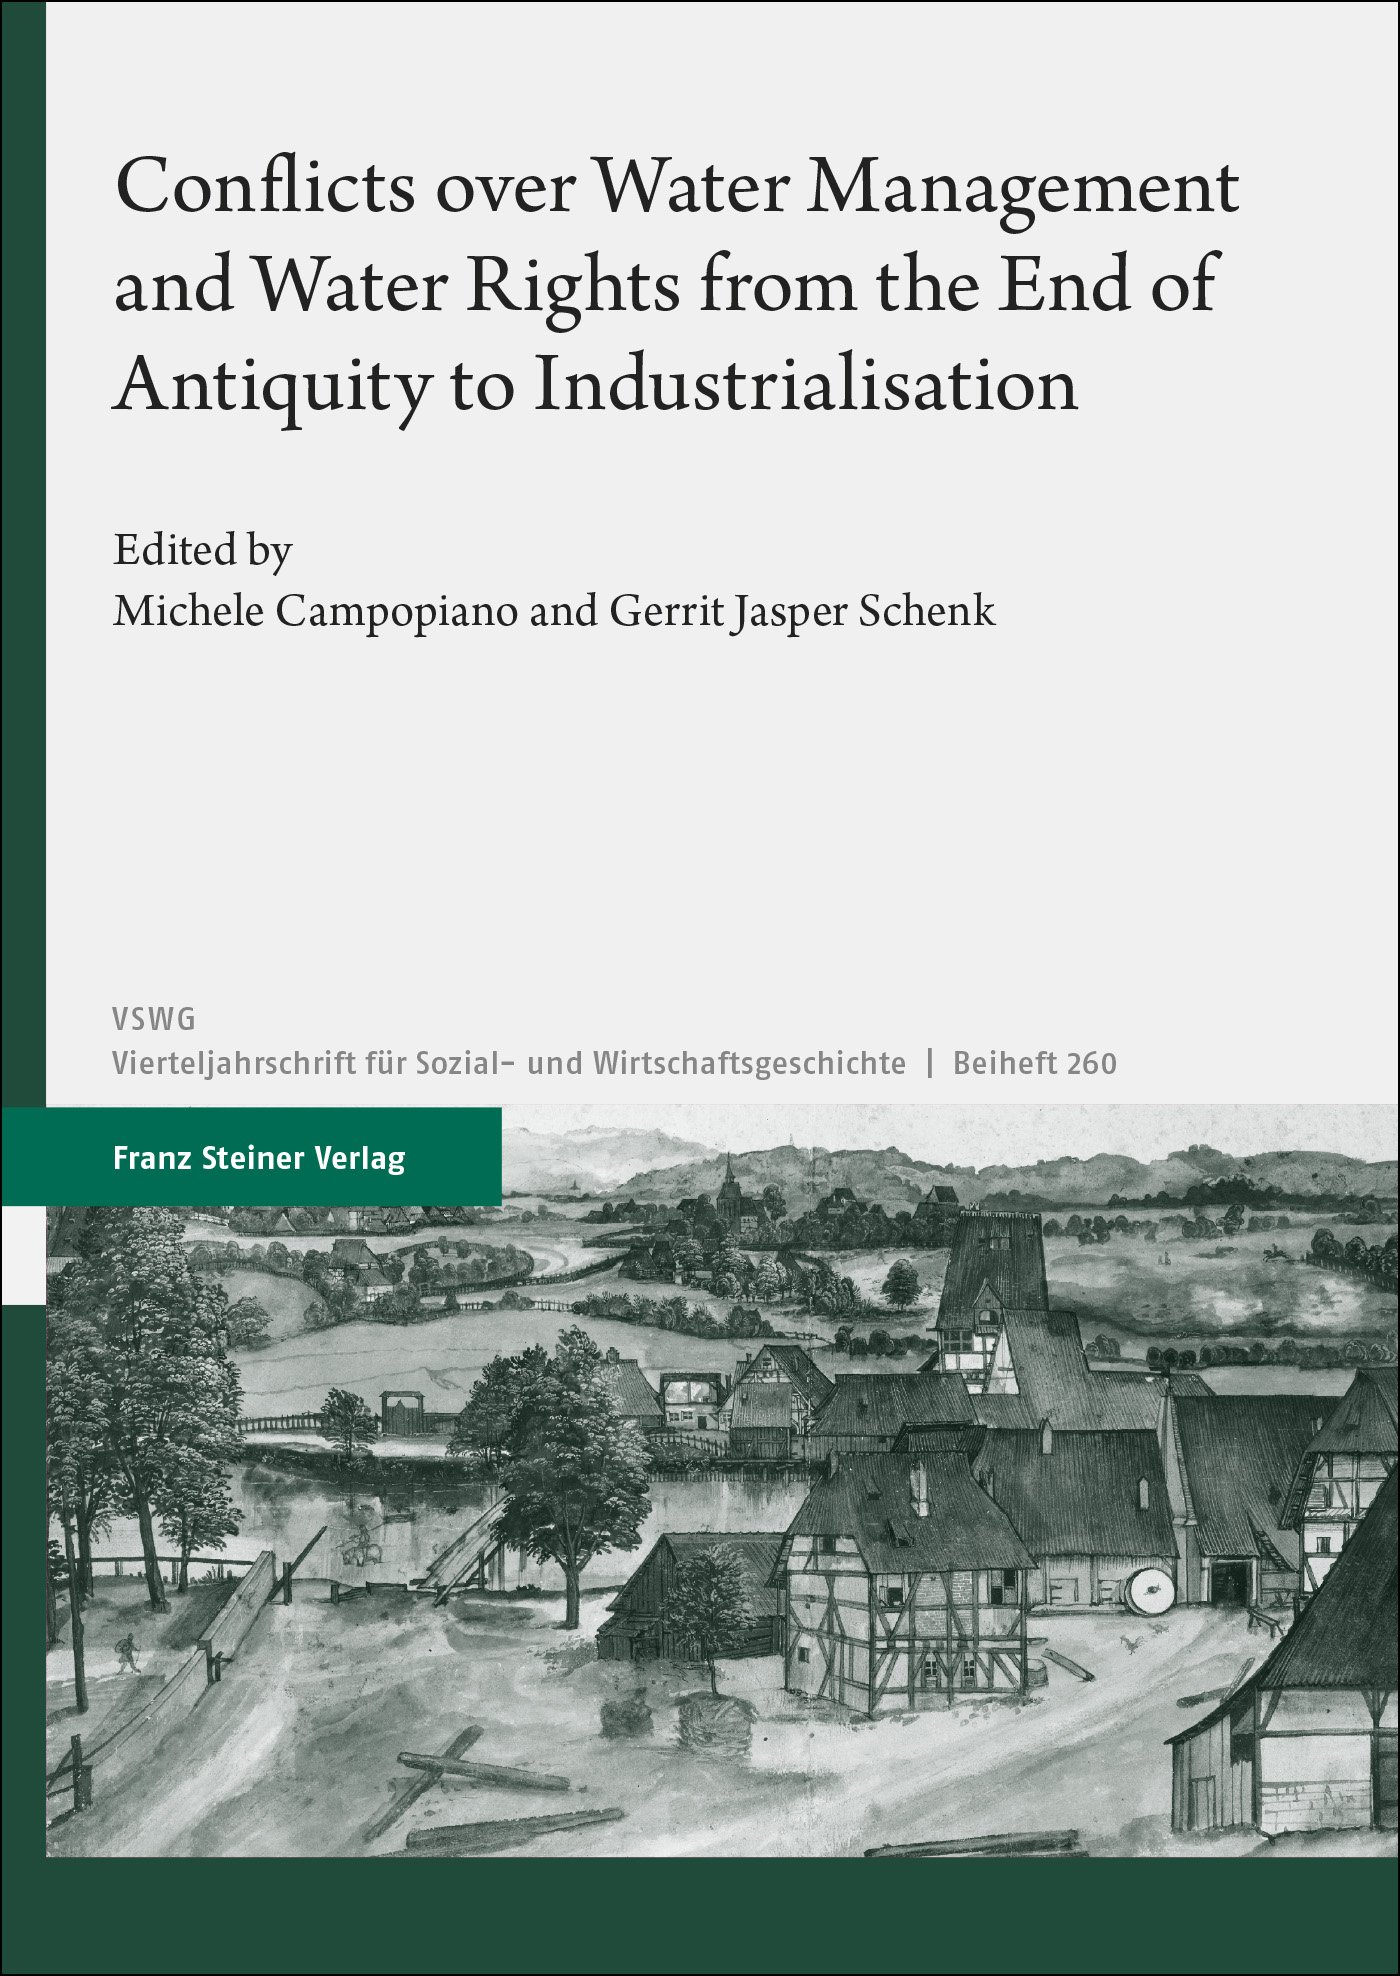 Conflicts over Water Management and Water Rights from the End of Antiquity to Industrialisation